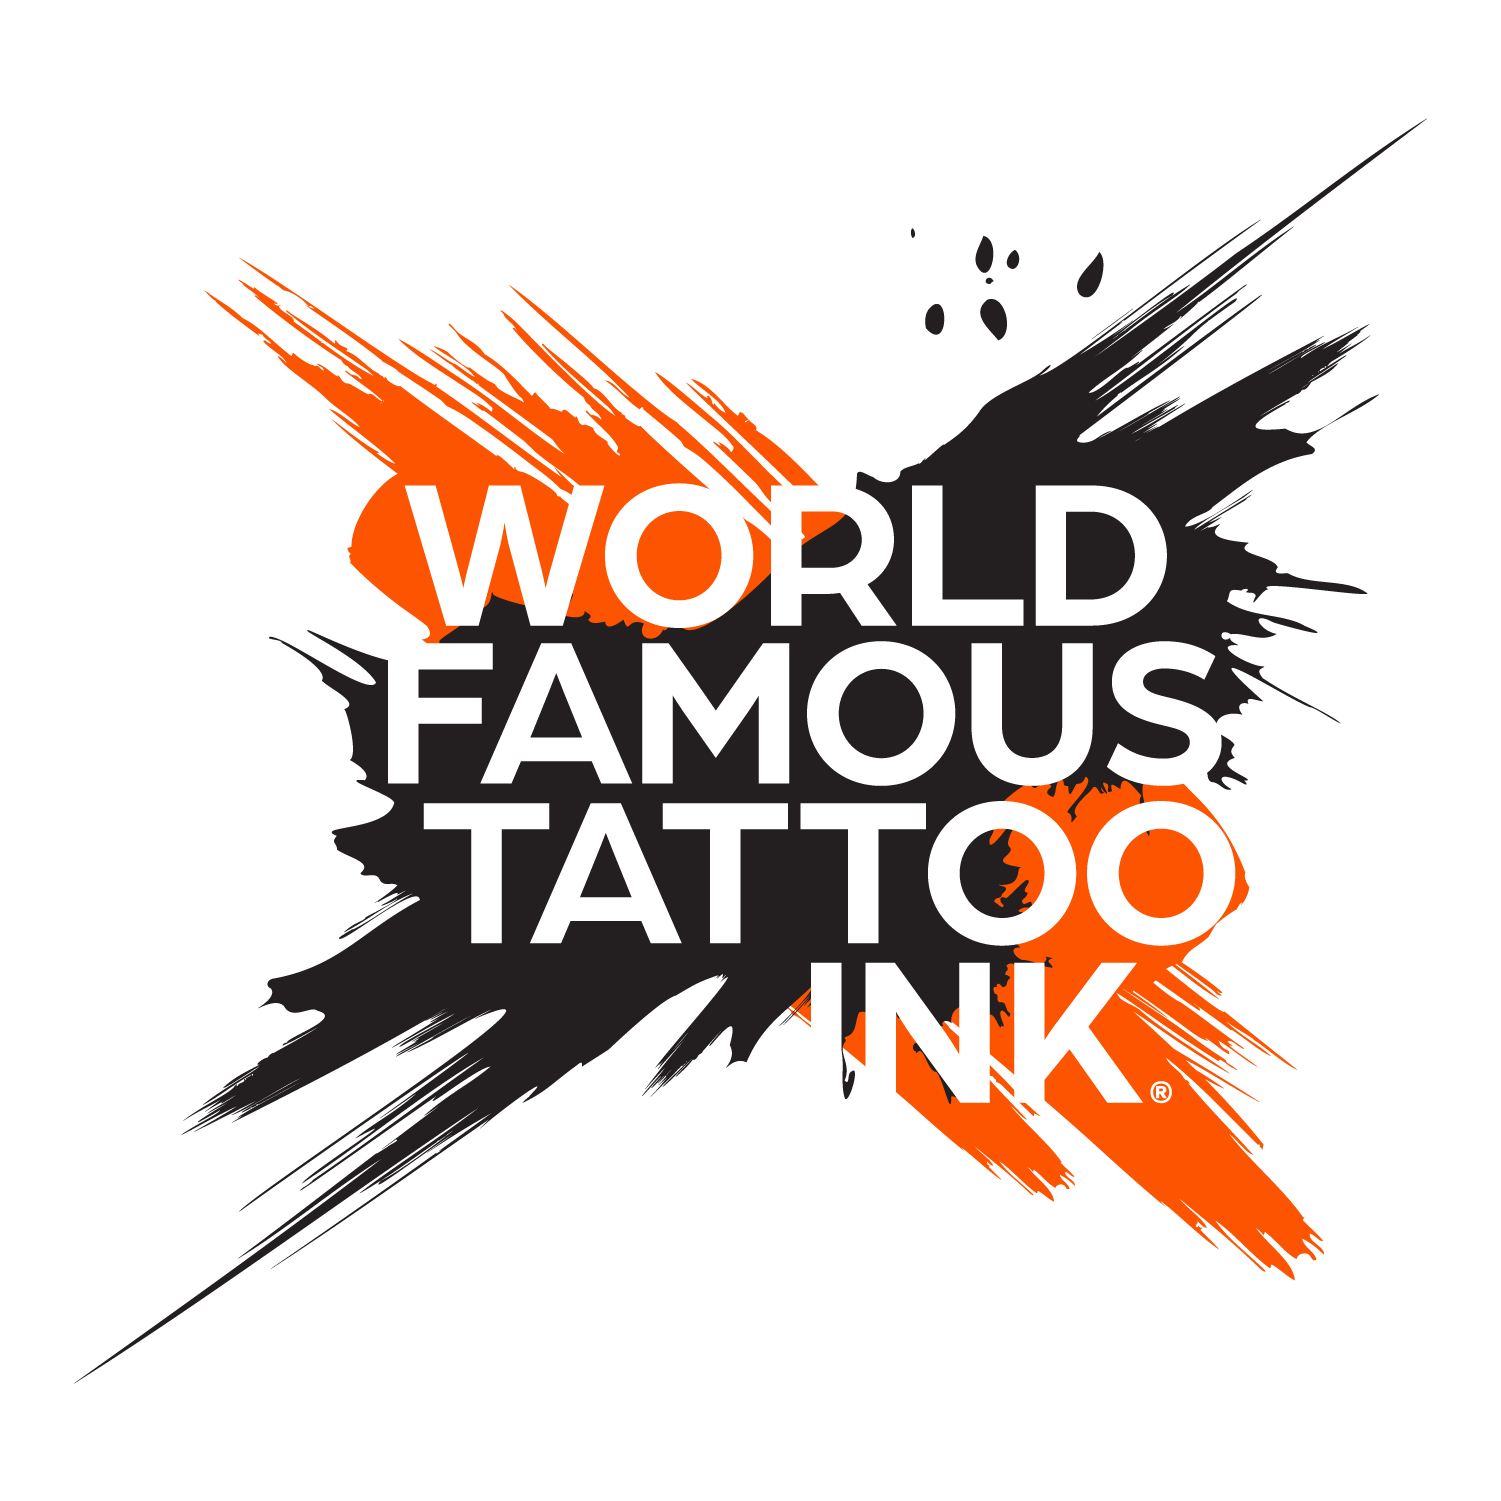 World Famous Tattoo Ink - Primary Color Set #2 (1 oz)